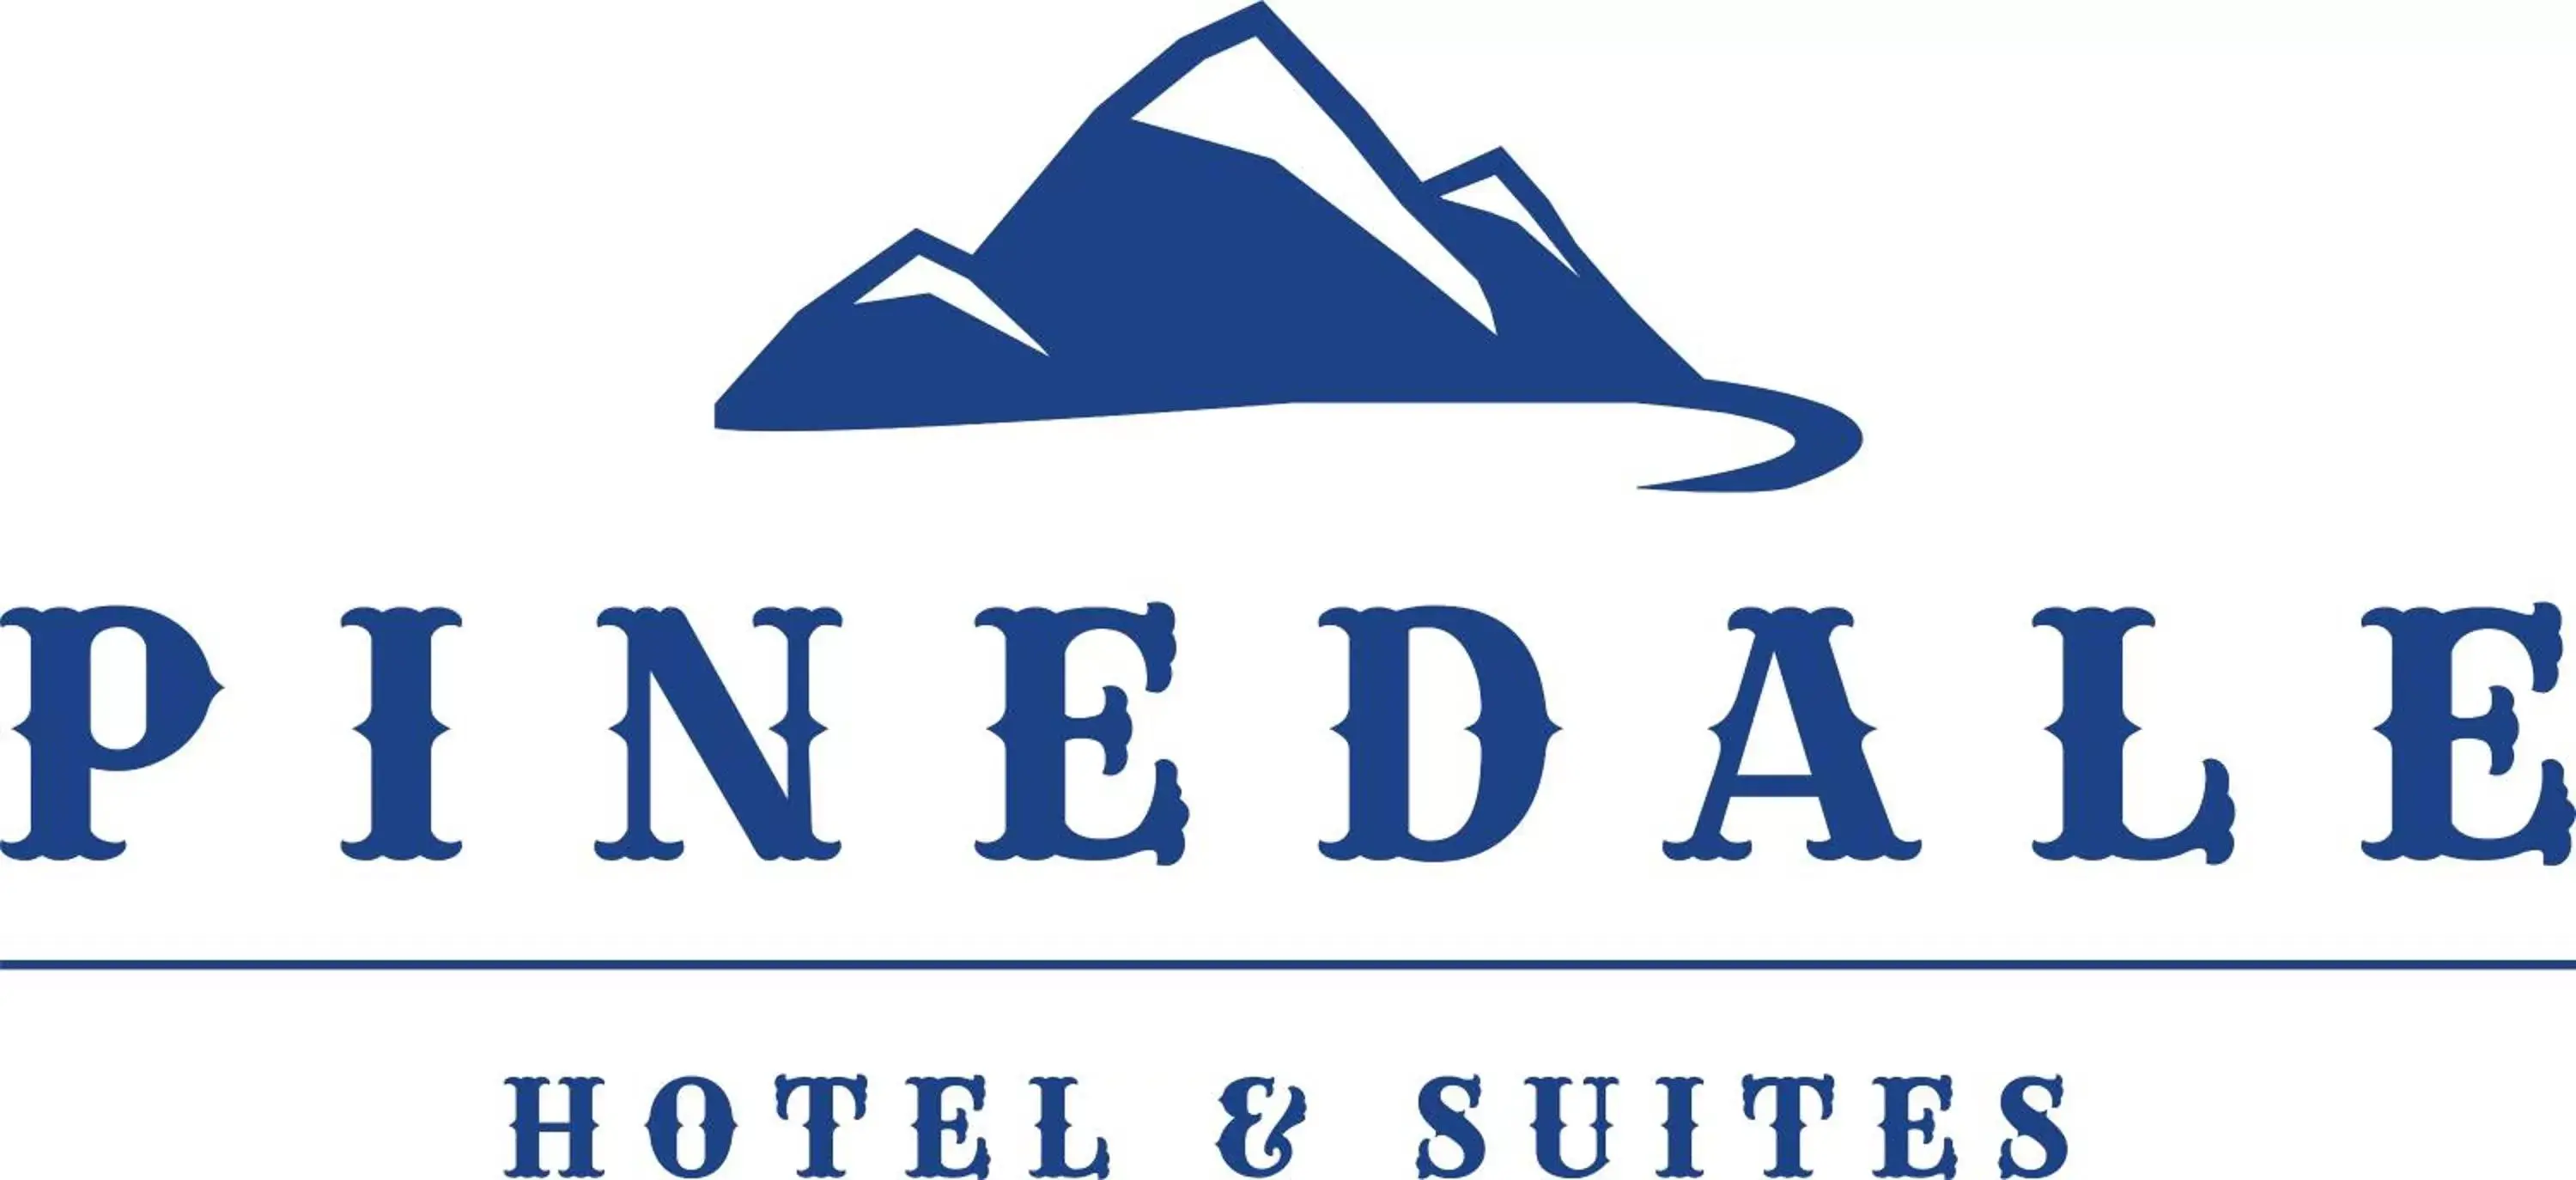 Property logo or sign, Property Logo/Sign in Pinedale Hotel & Suites